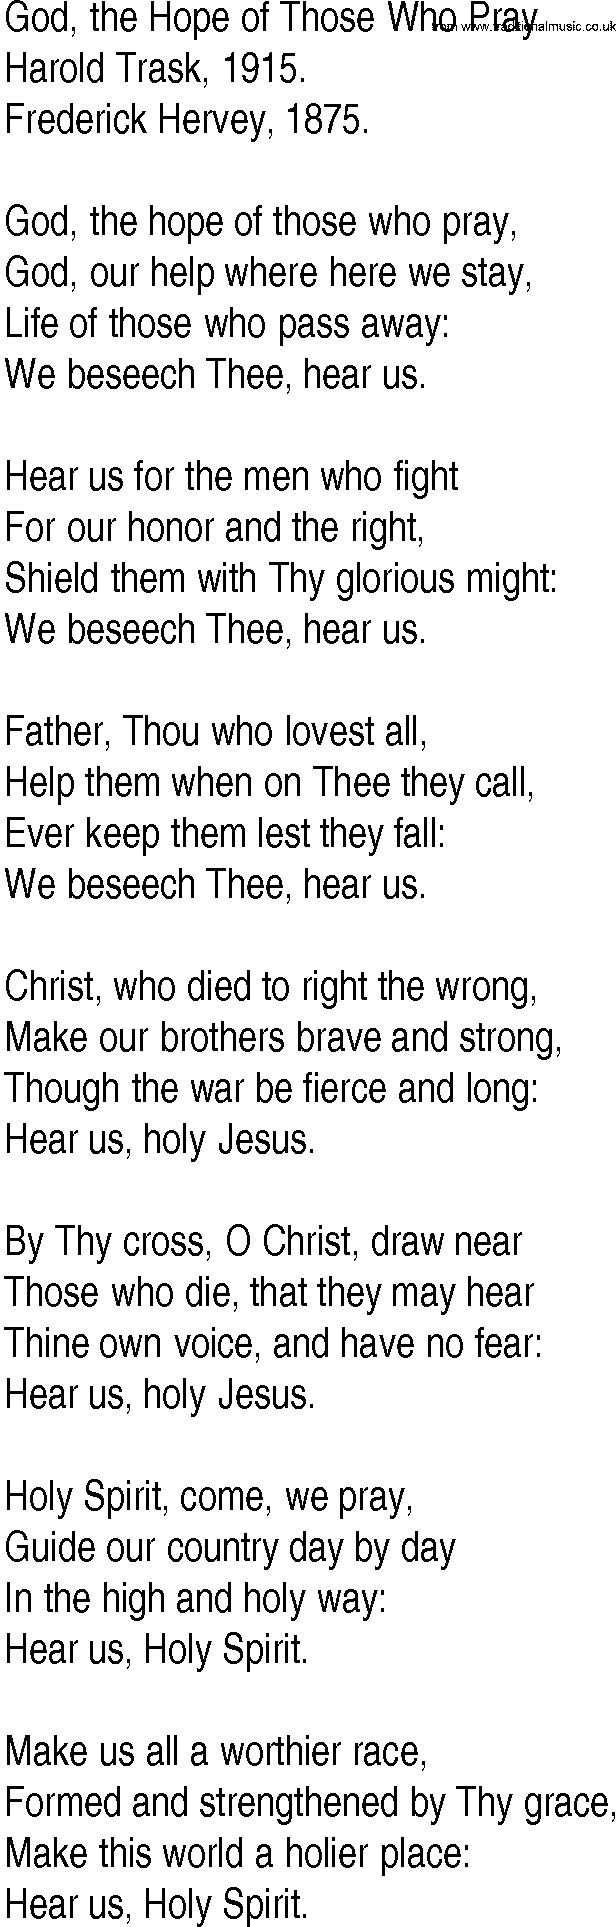 Hymn and Gospel Song: God, the Hope of Those Who Pray by Harold Trask lyrics